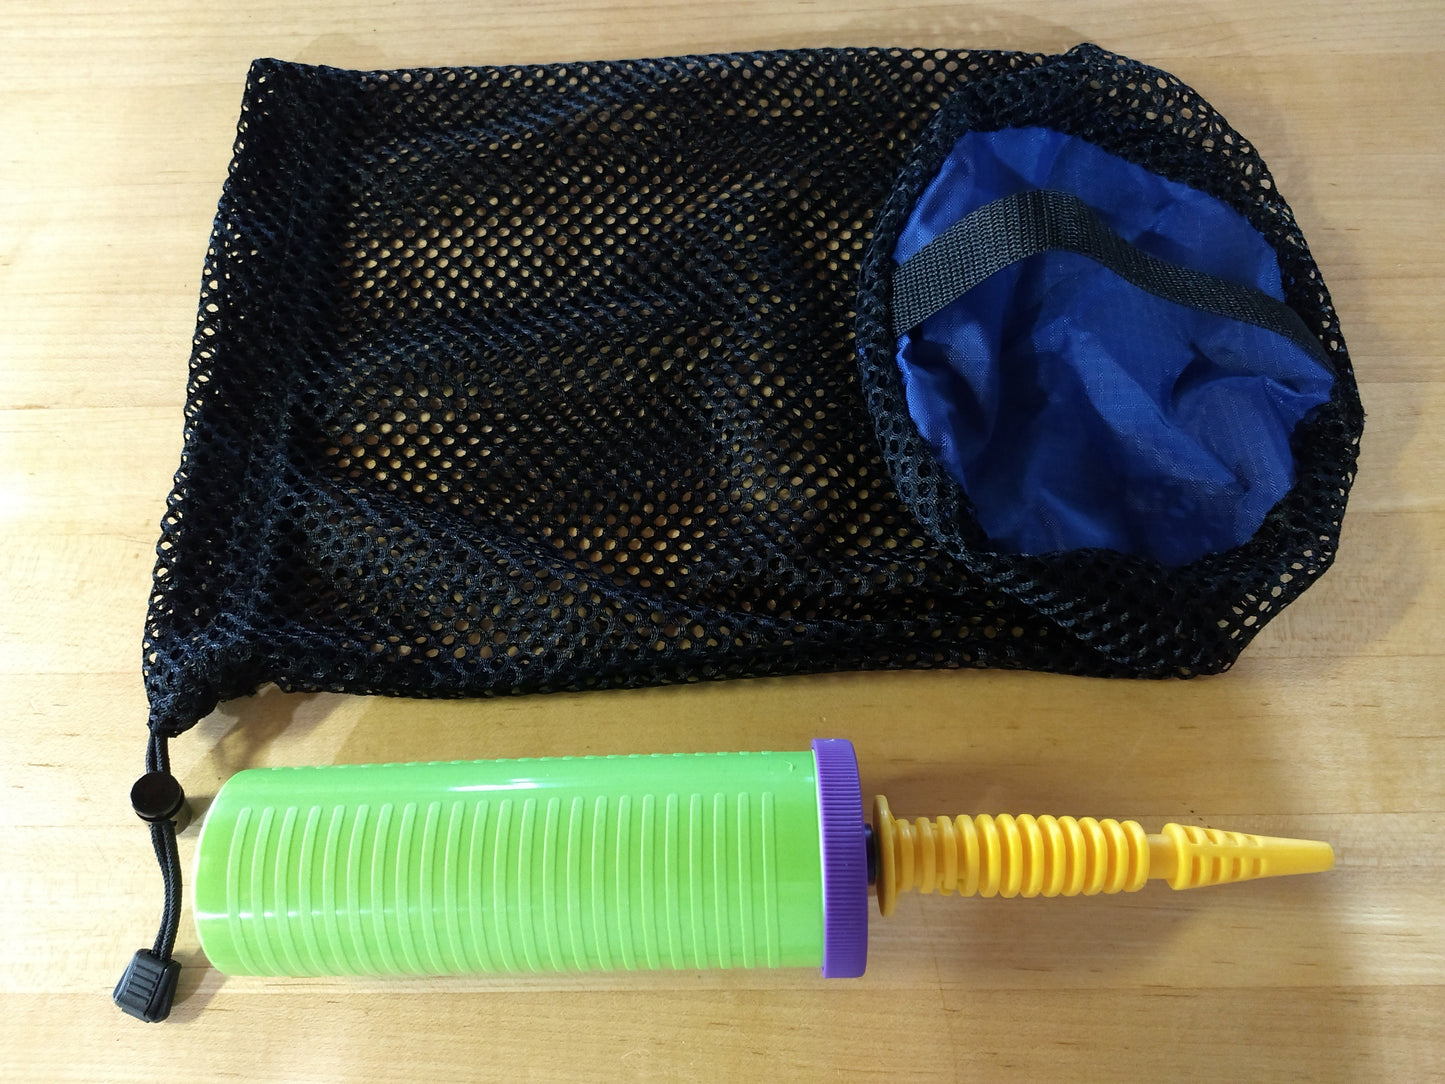 Light Weight Double Action Inflation Pump & Custom Mesh Stuff Sack (replacement/extra set sold together)